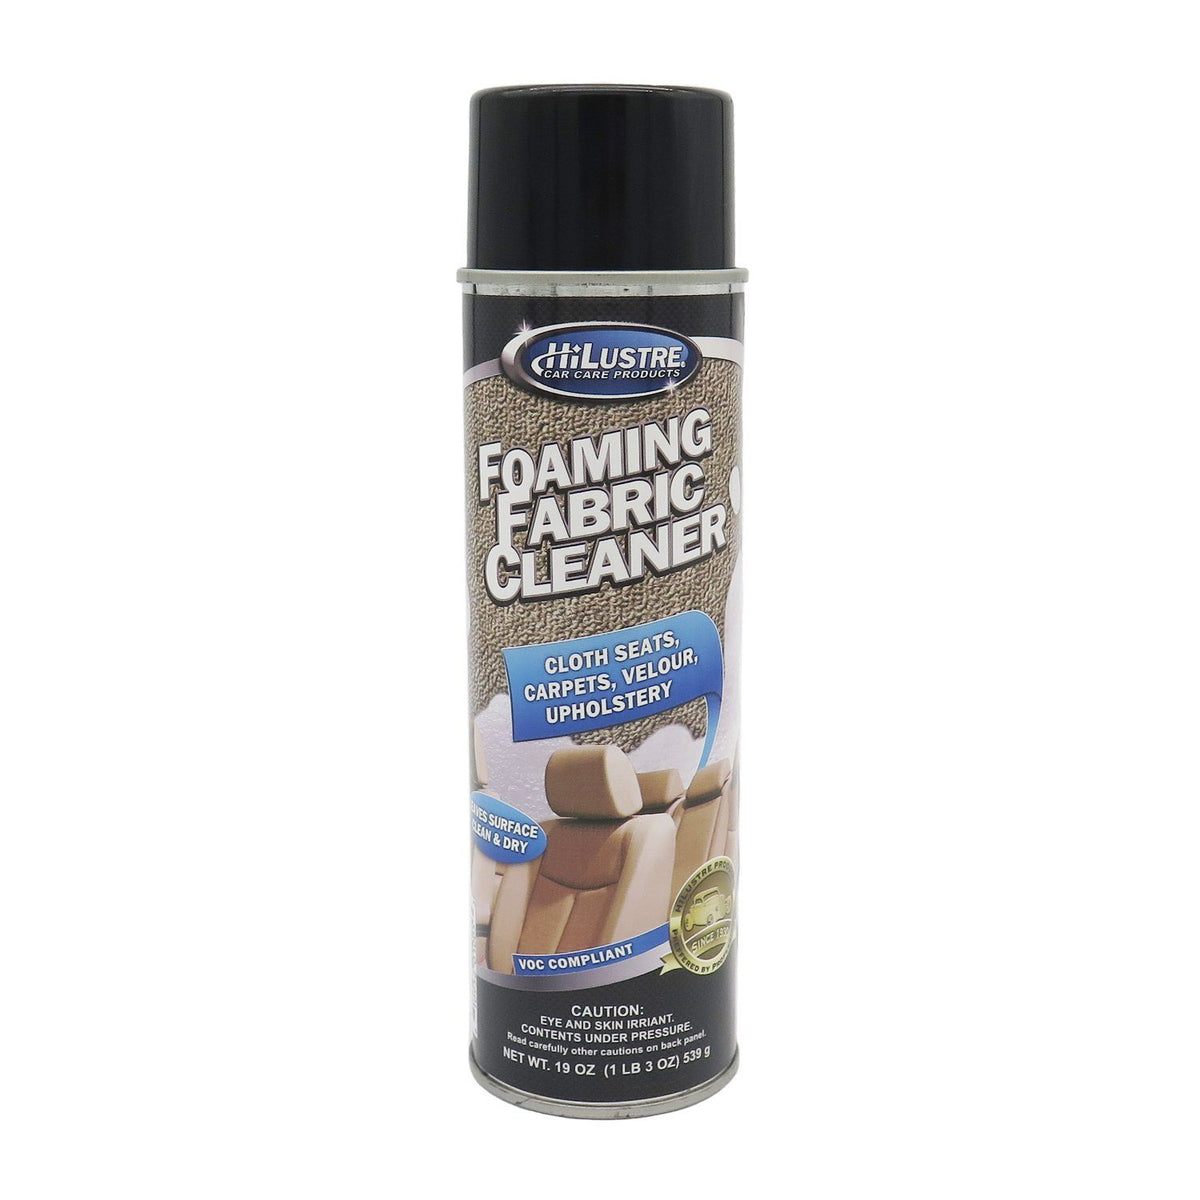 HiLustre Foaming Fabric Cleaner